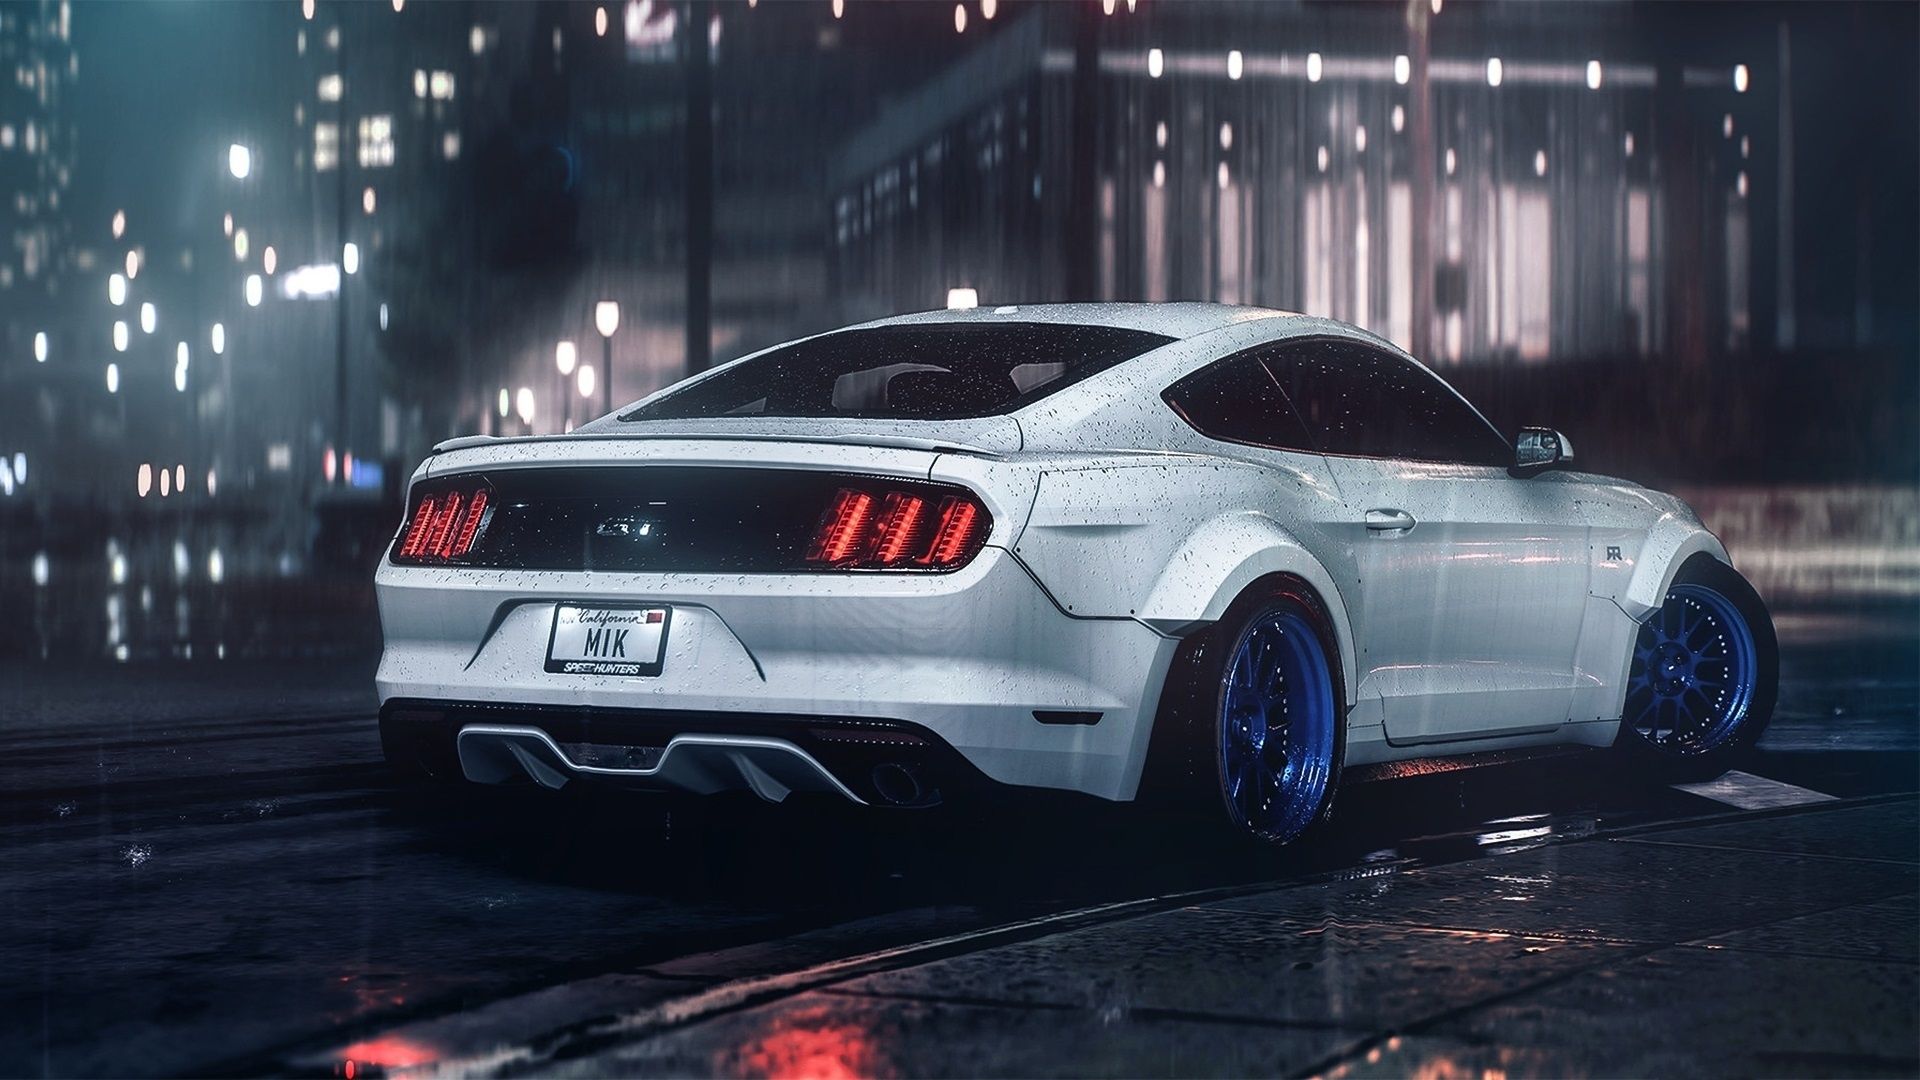 Best Ford Mustang Gt Wallpaper Full HD For Pc